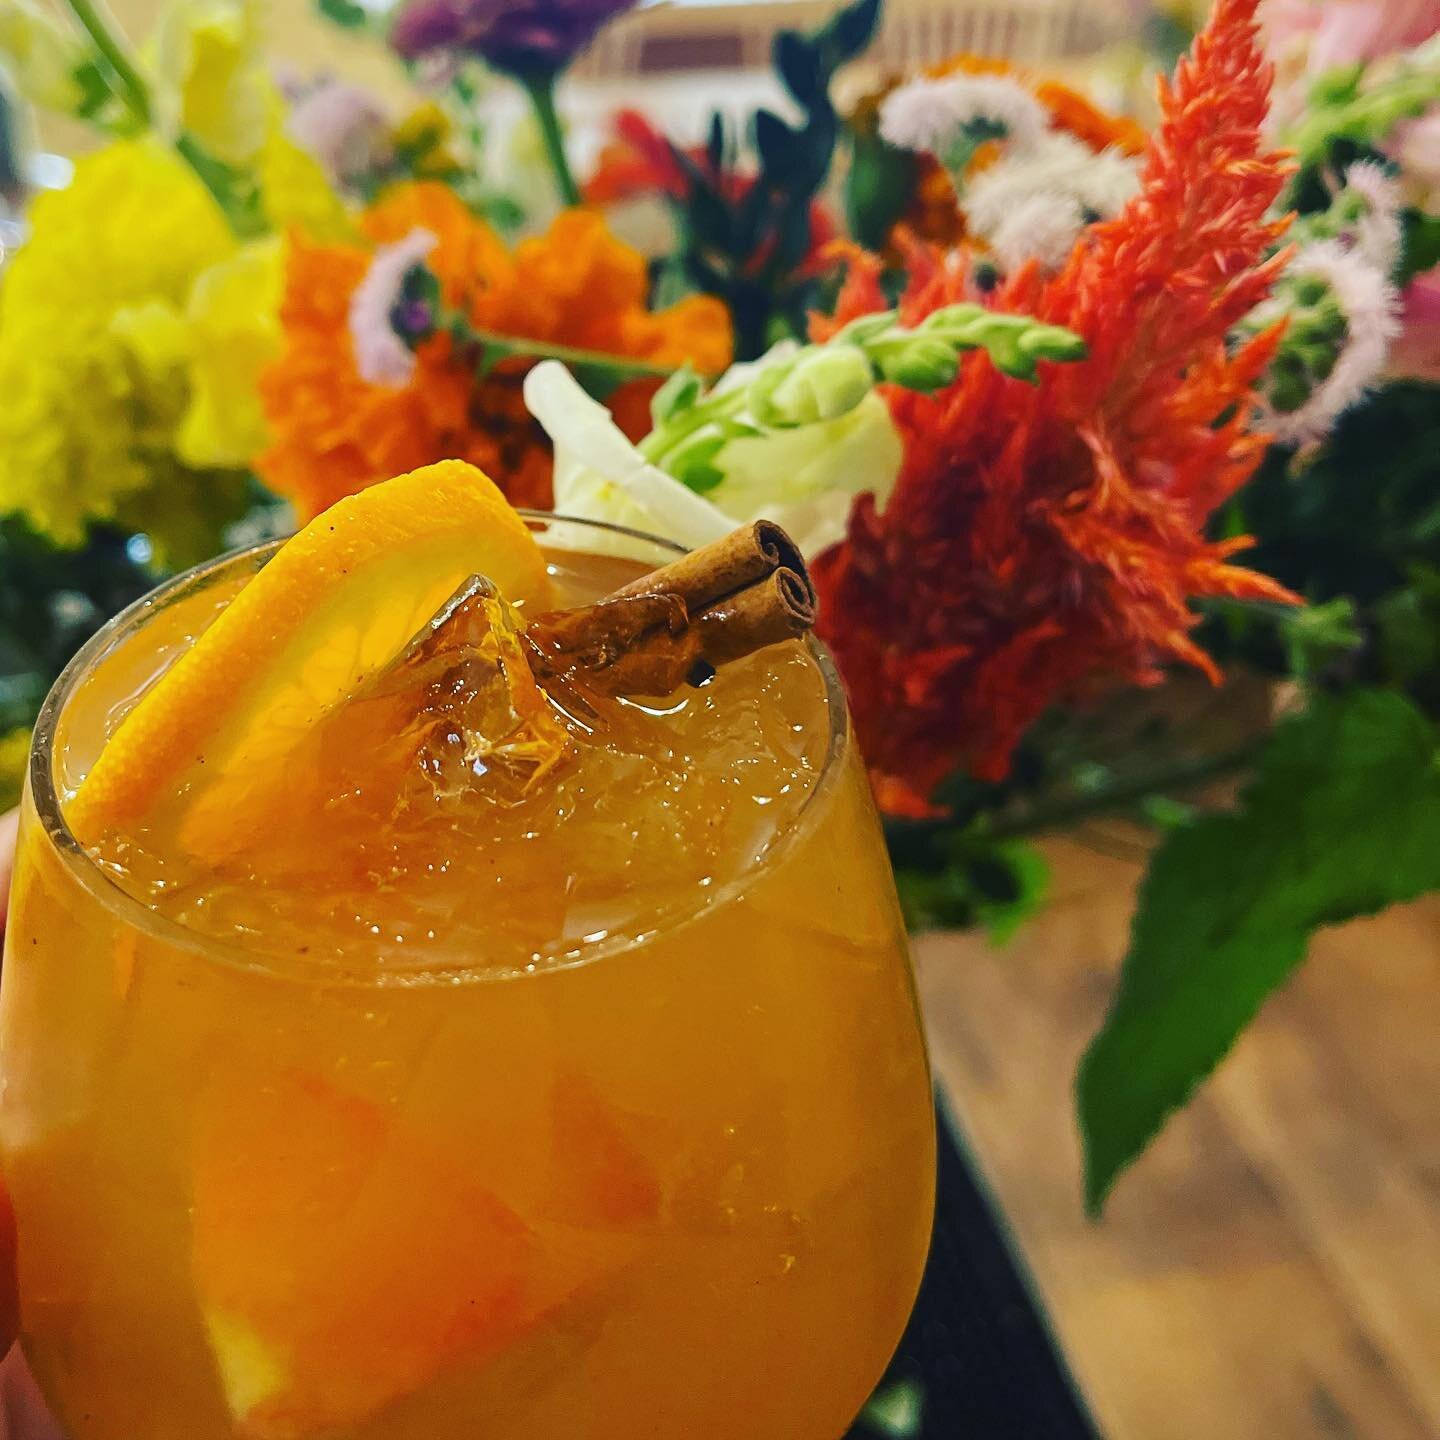 New fall hours!!! Friday-Sunday 9-2!!

Cider Sangria! Cheers! Come@join us this weekend and celebrate fall in the Catskills the yummy way :):)) 

#sweetsuesphoenicia #fall #catskills #cider #sangria #cocktails #brunch #local #localbusiness #phoenicia